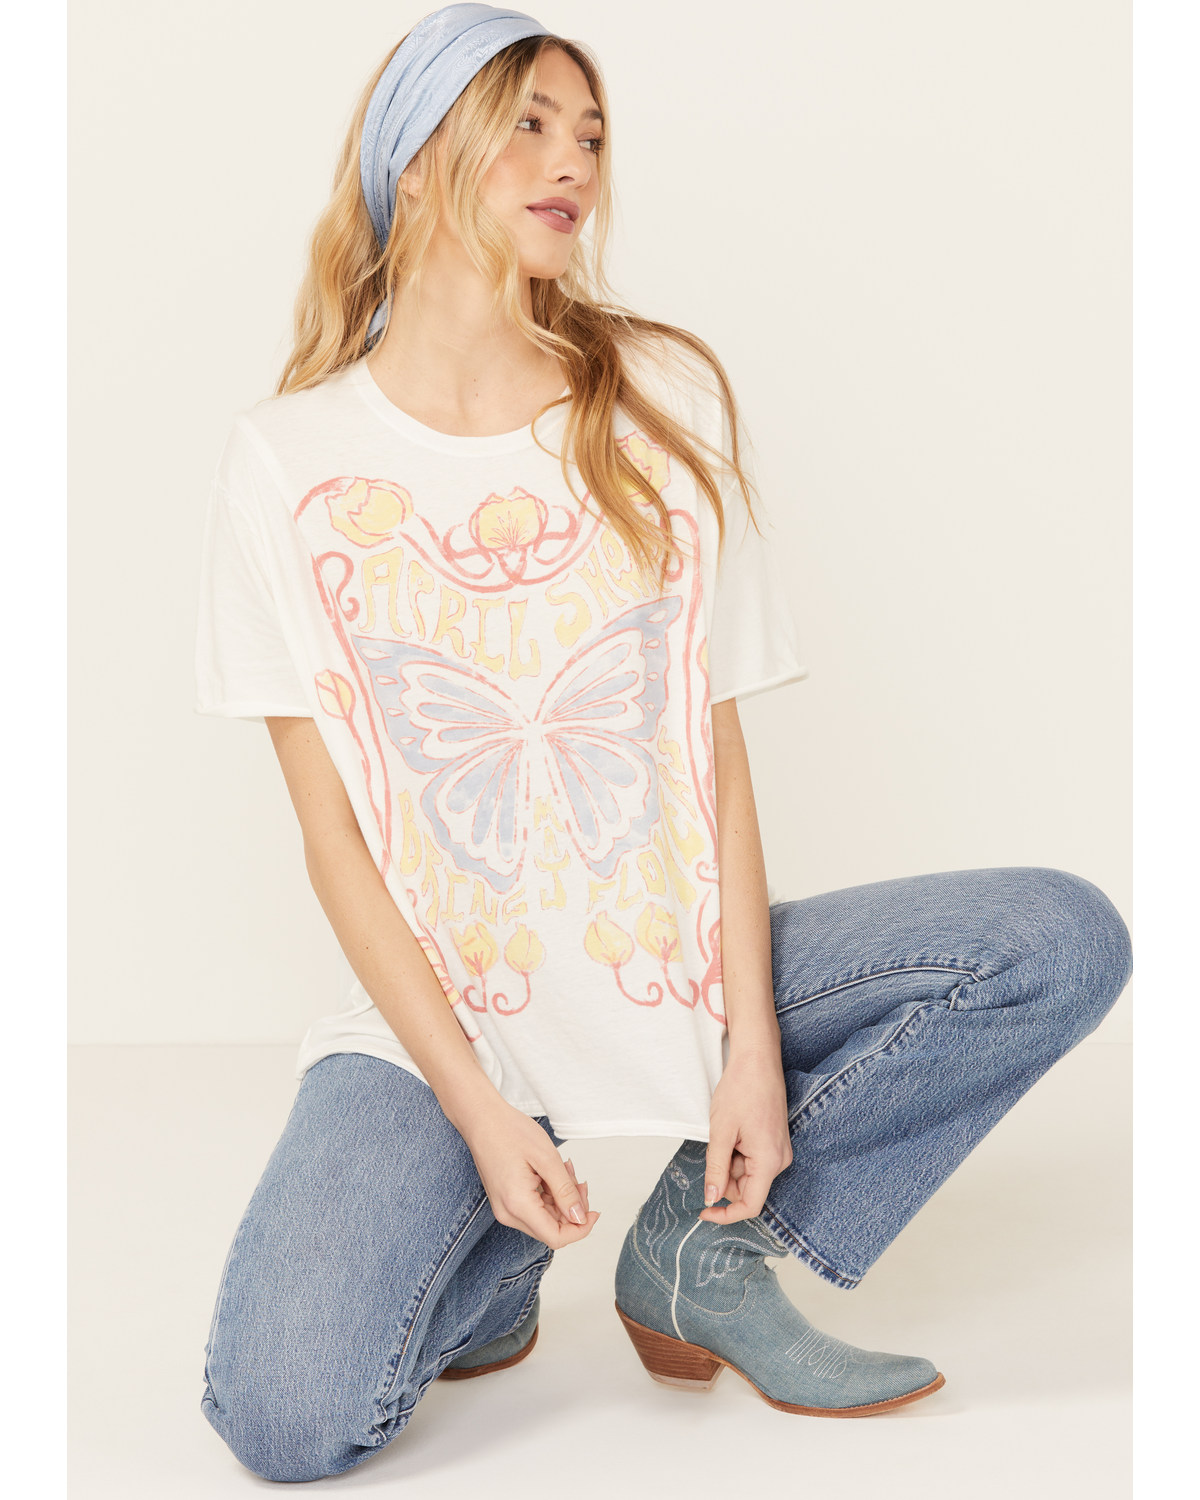 Free People Women's Spring Showers Short Sleeve Graphic Tee